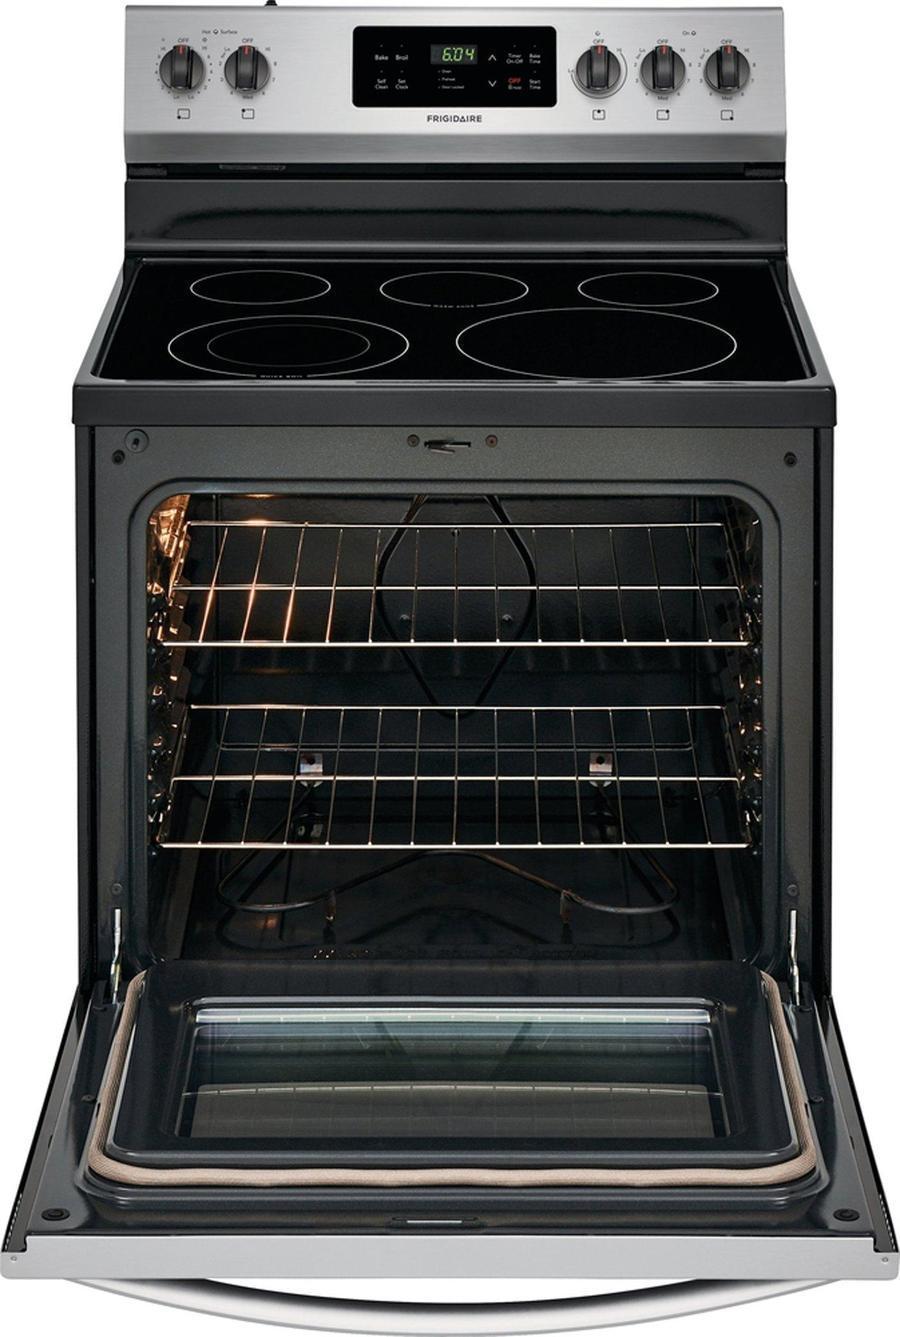 Frigidaire - 5.3 cu. ft Electric Range in Stainless - CFEF3054US